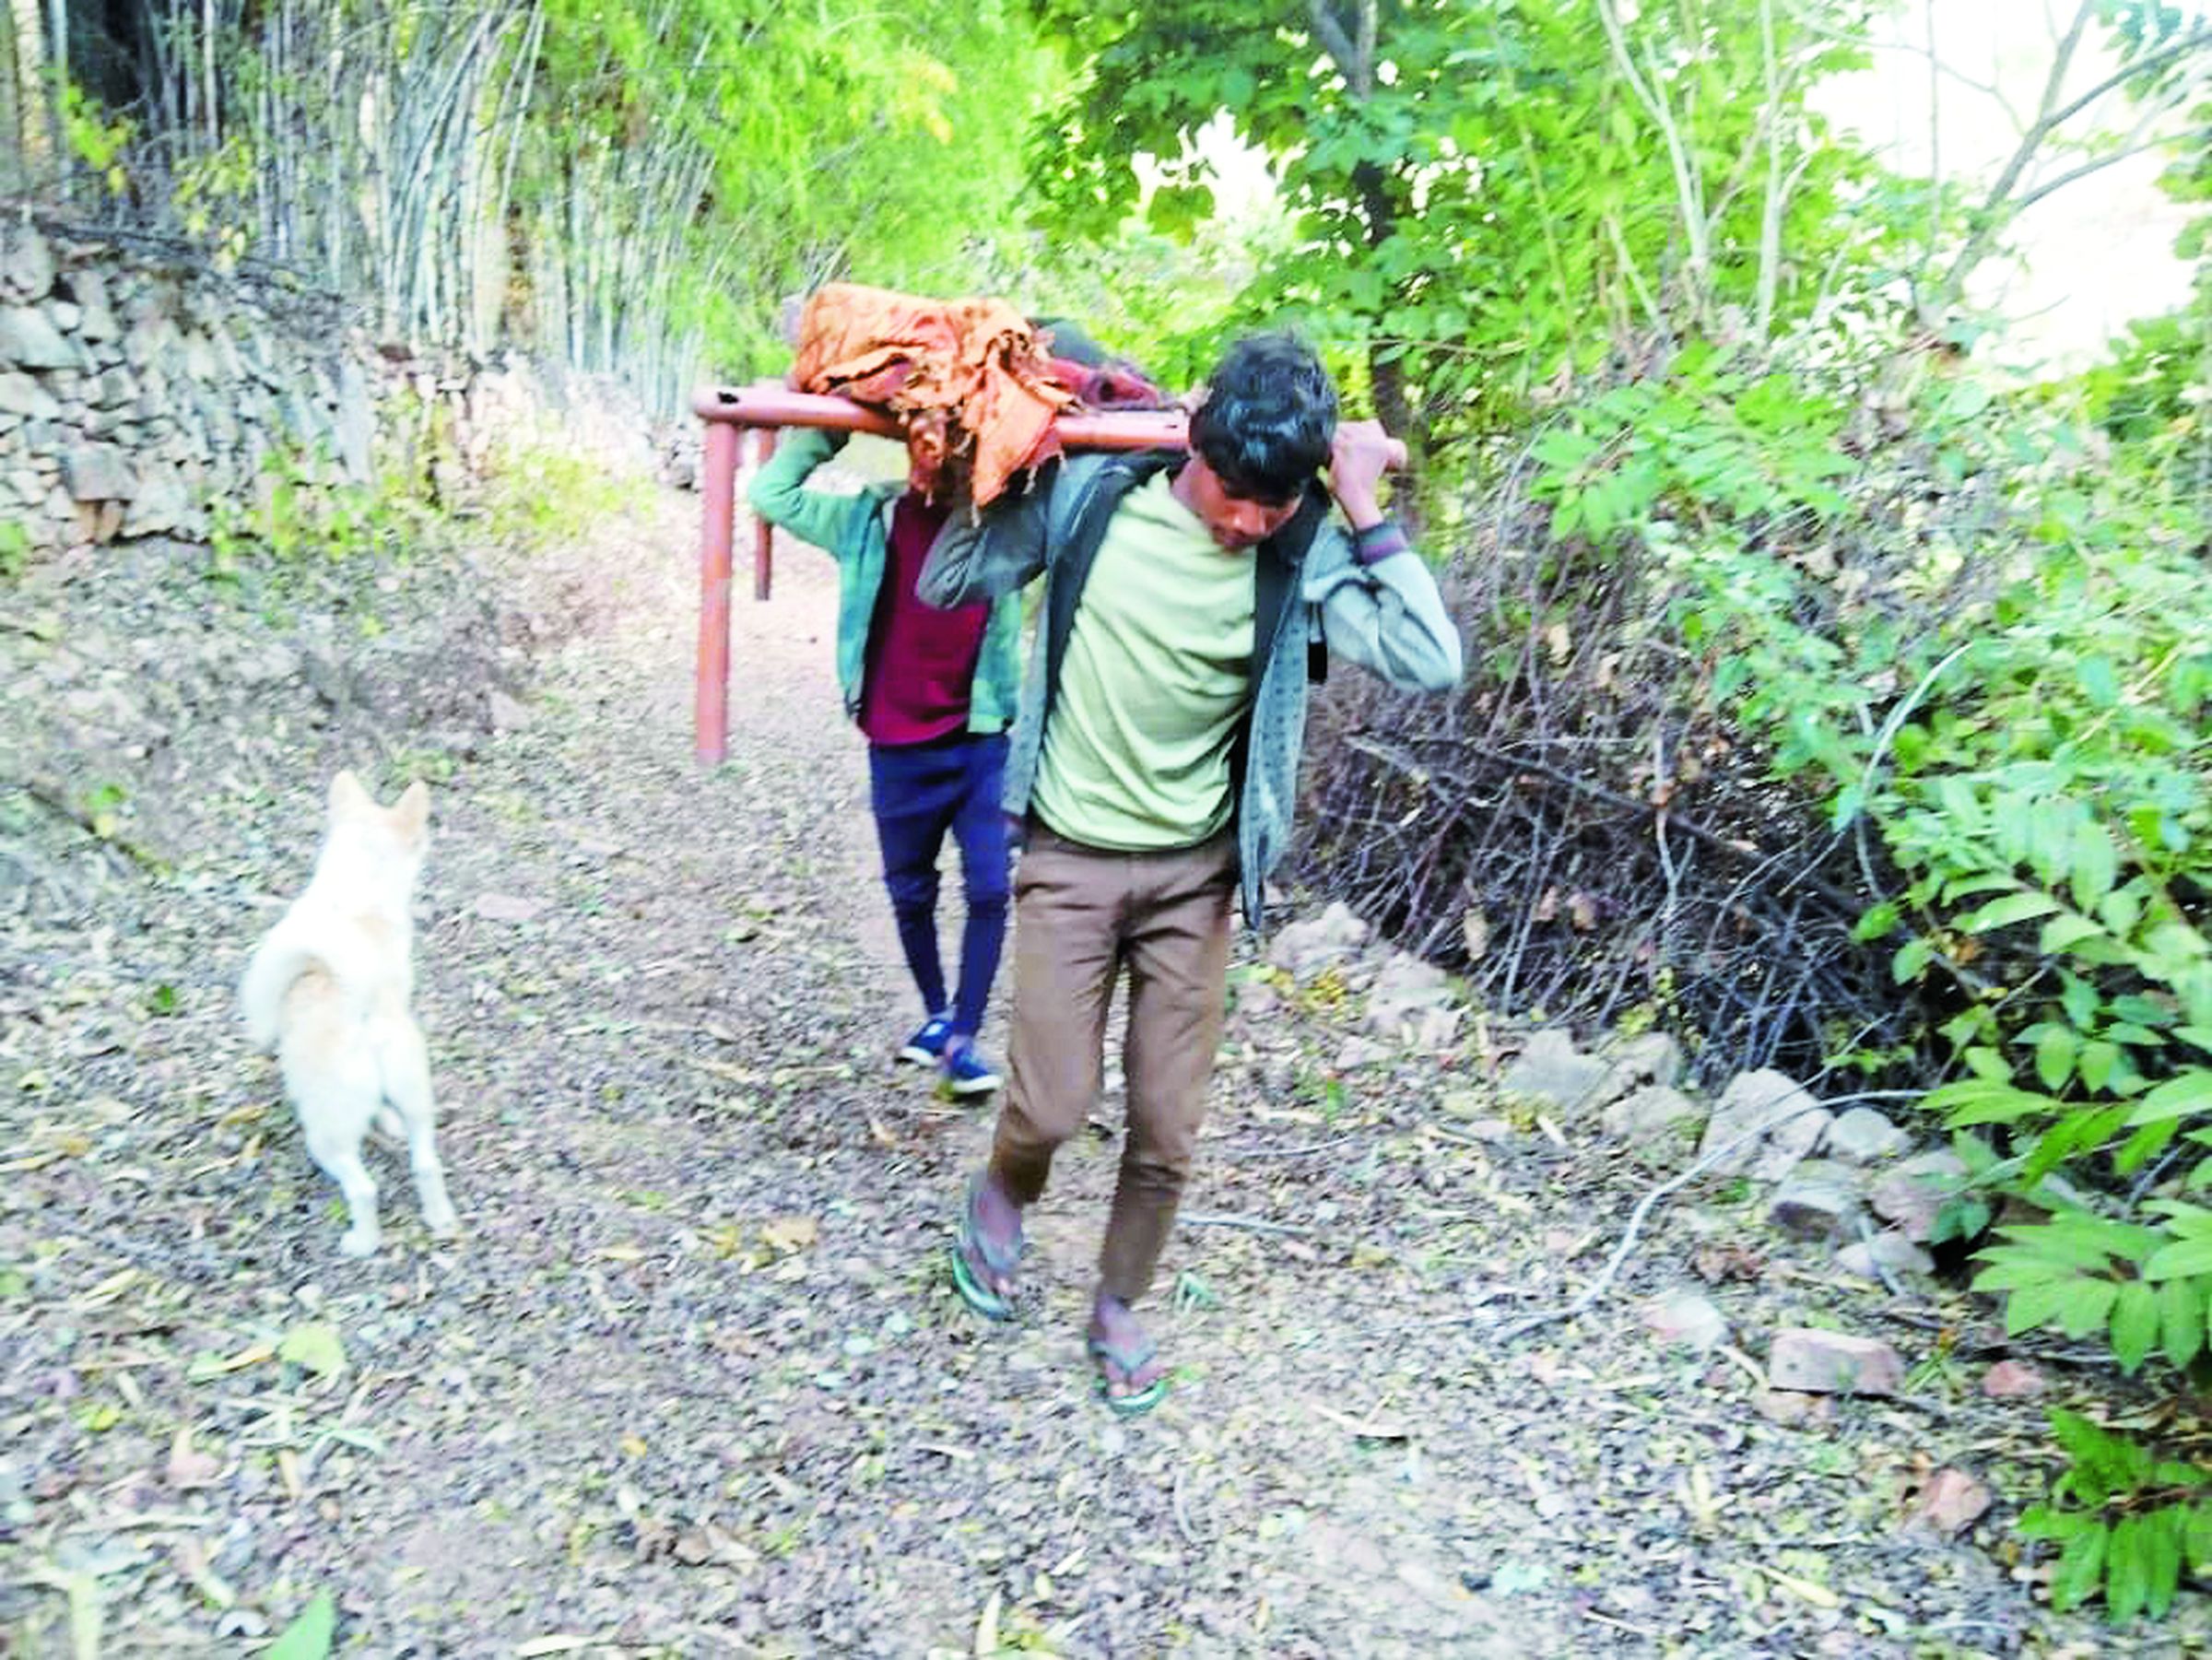 Tribal area news : Ambulance found after taking 3 km on cot